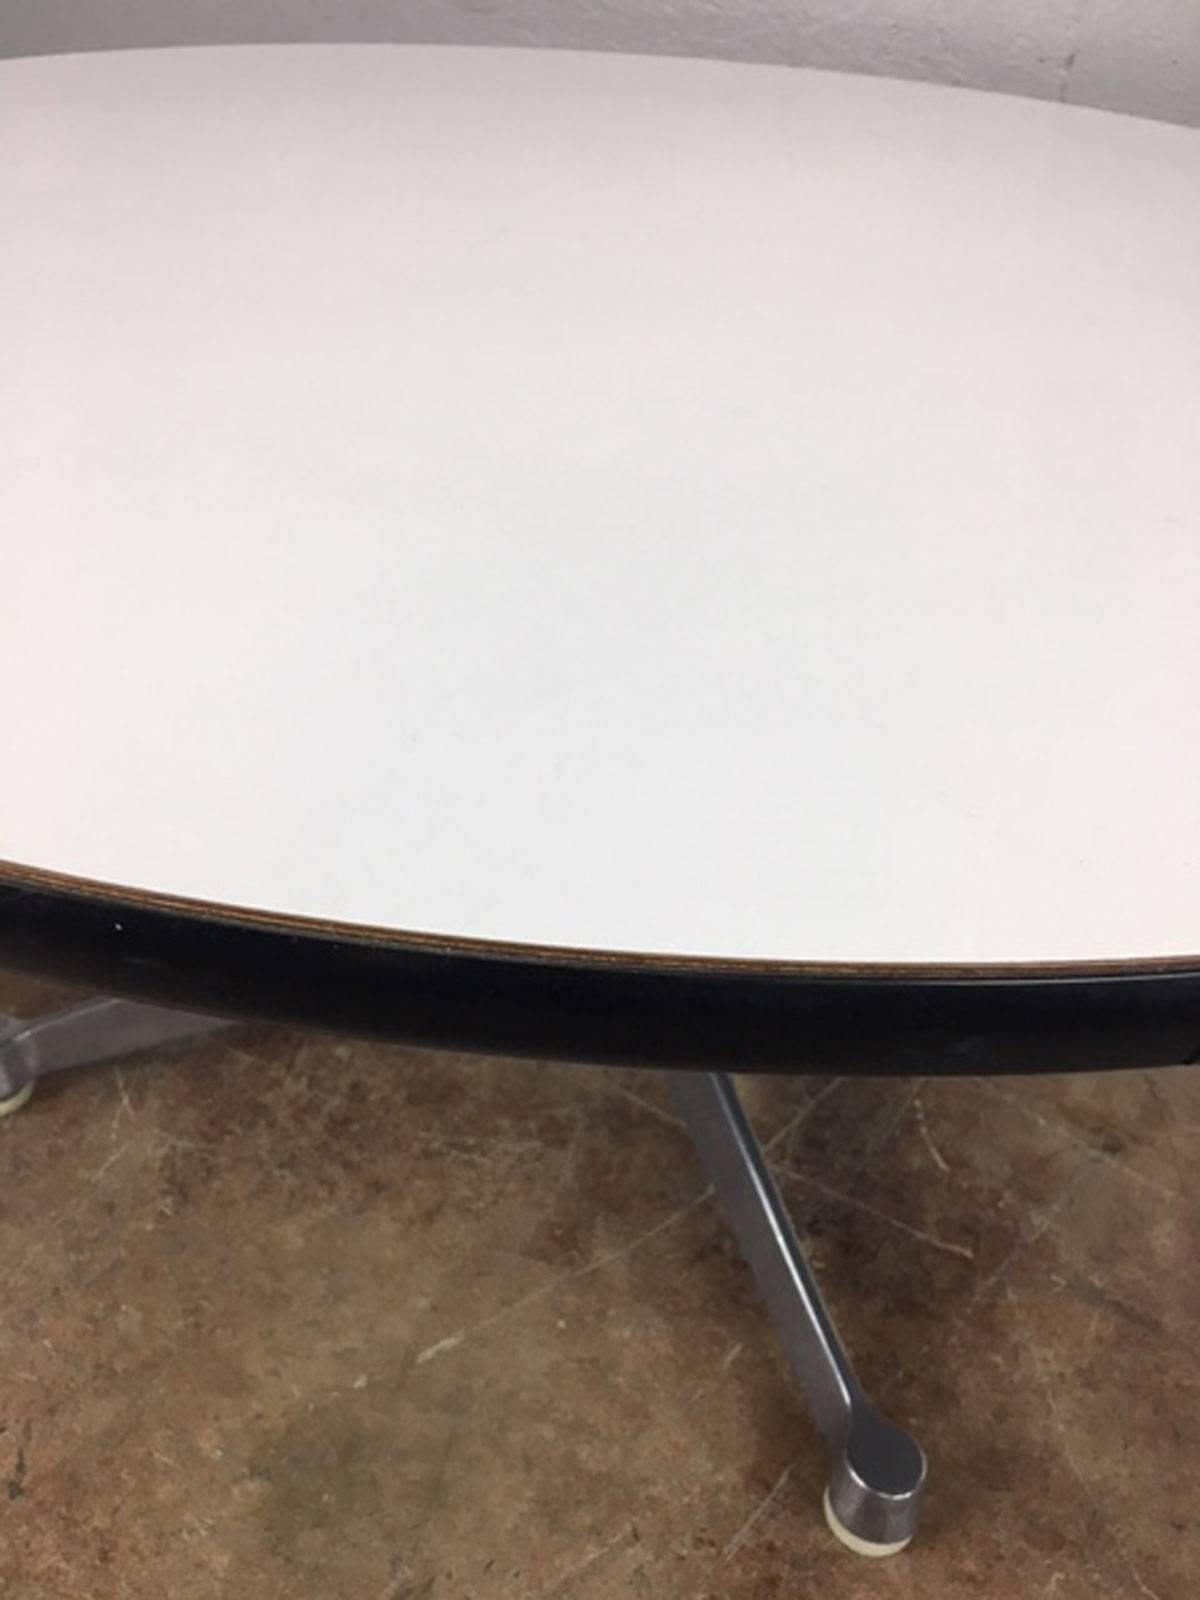 Herman Miller Coffee Table In Good Condition For Sale In Phoenix, AZ